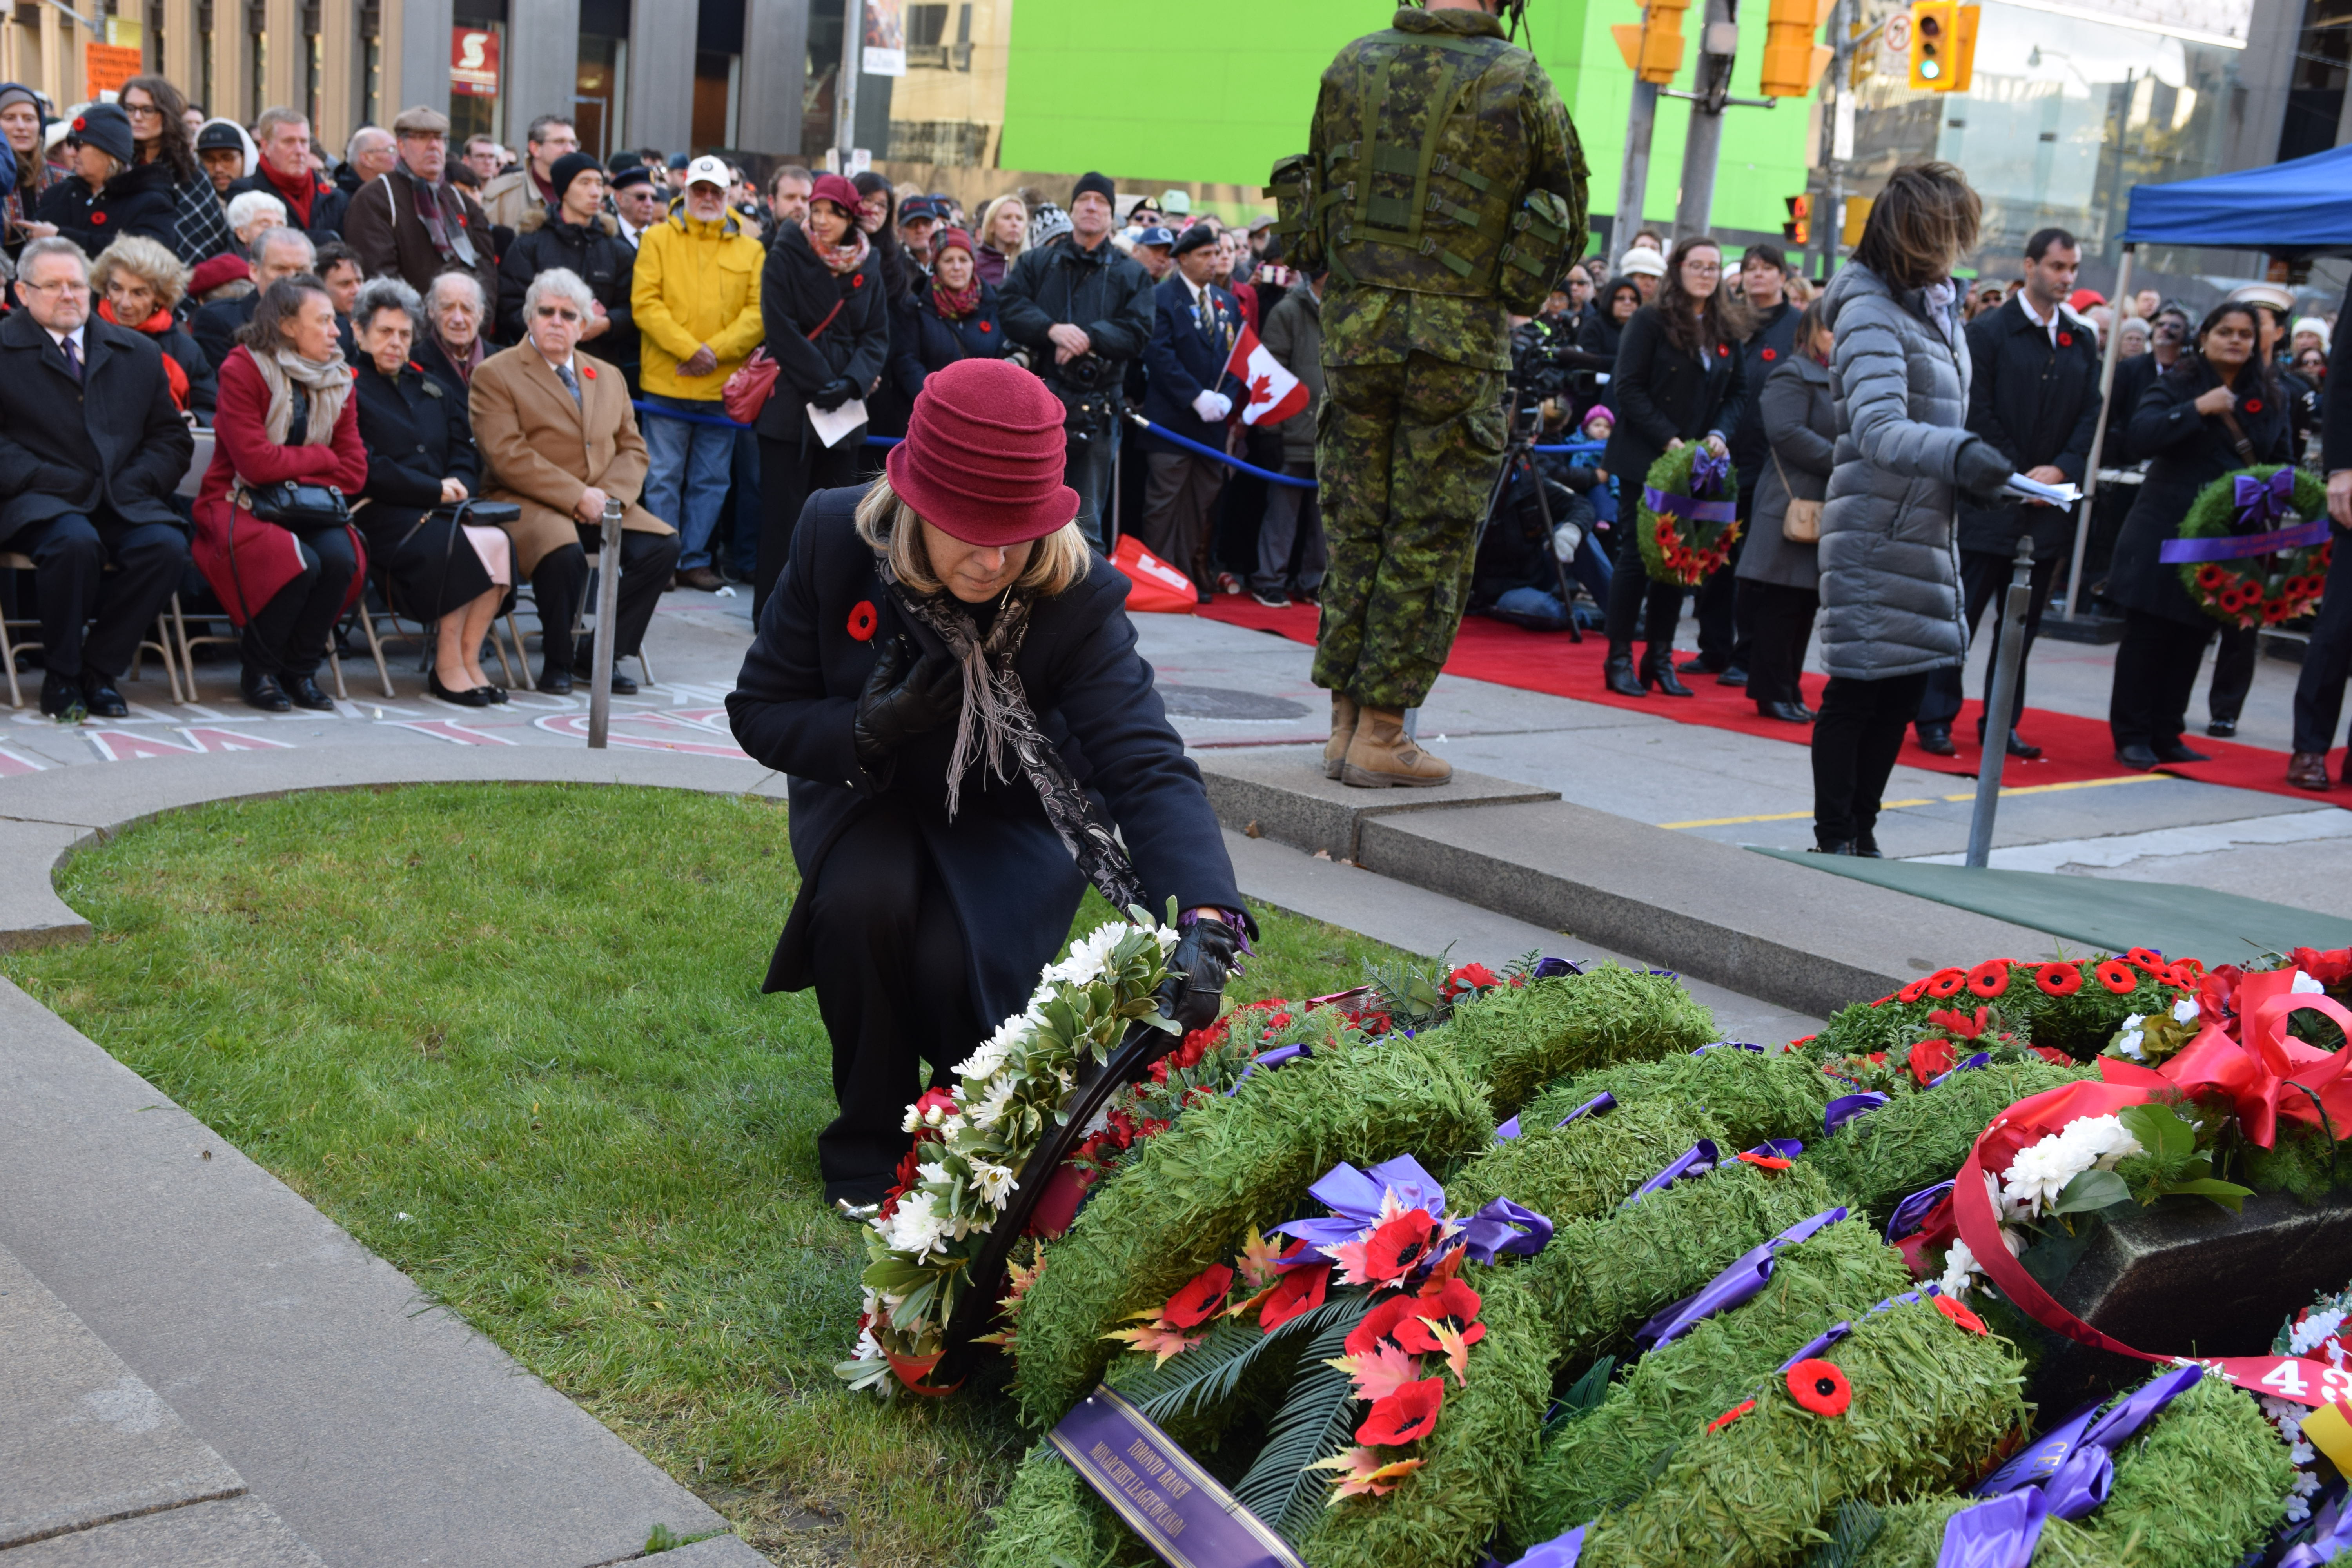 Rhonda Seidman-Carlson is wearing the brown/burgundy hat and placing the wreath